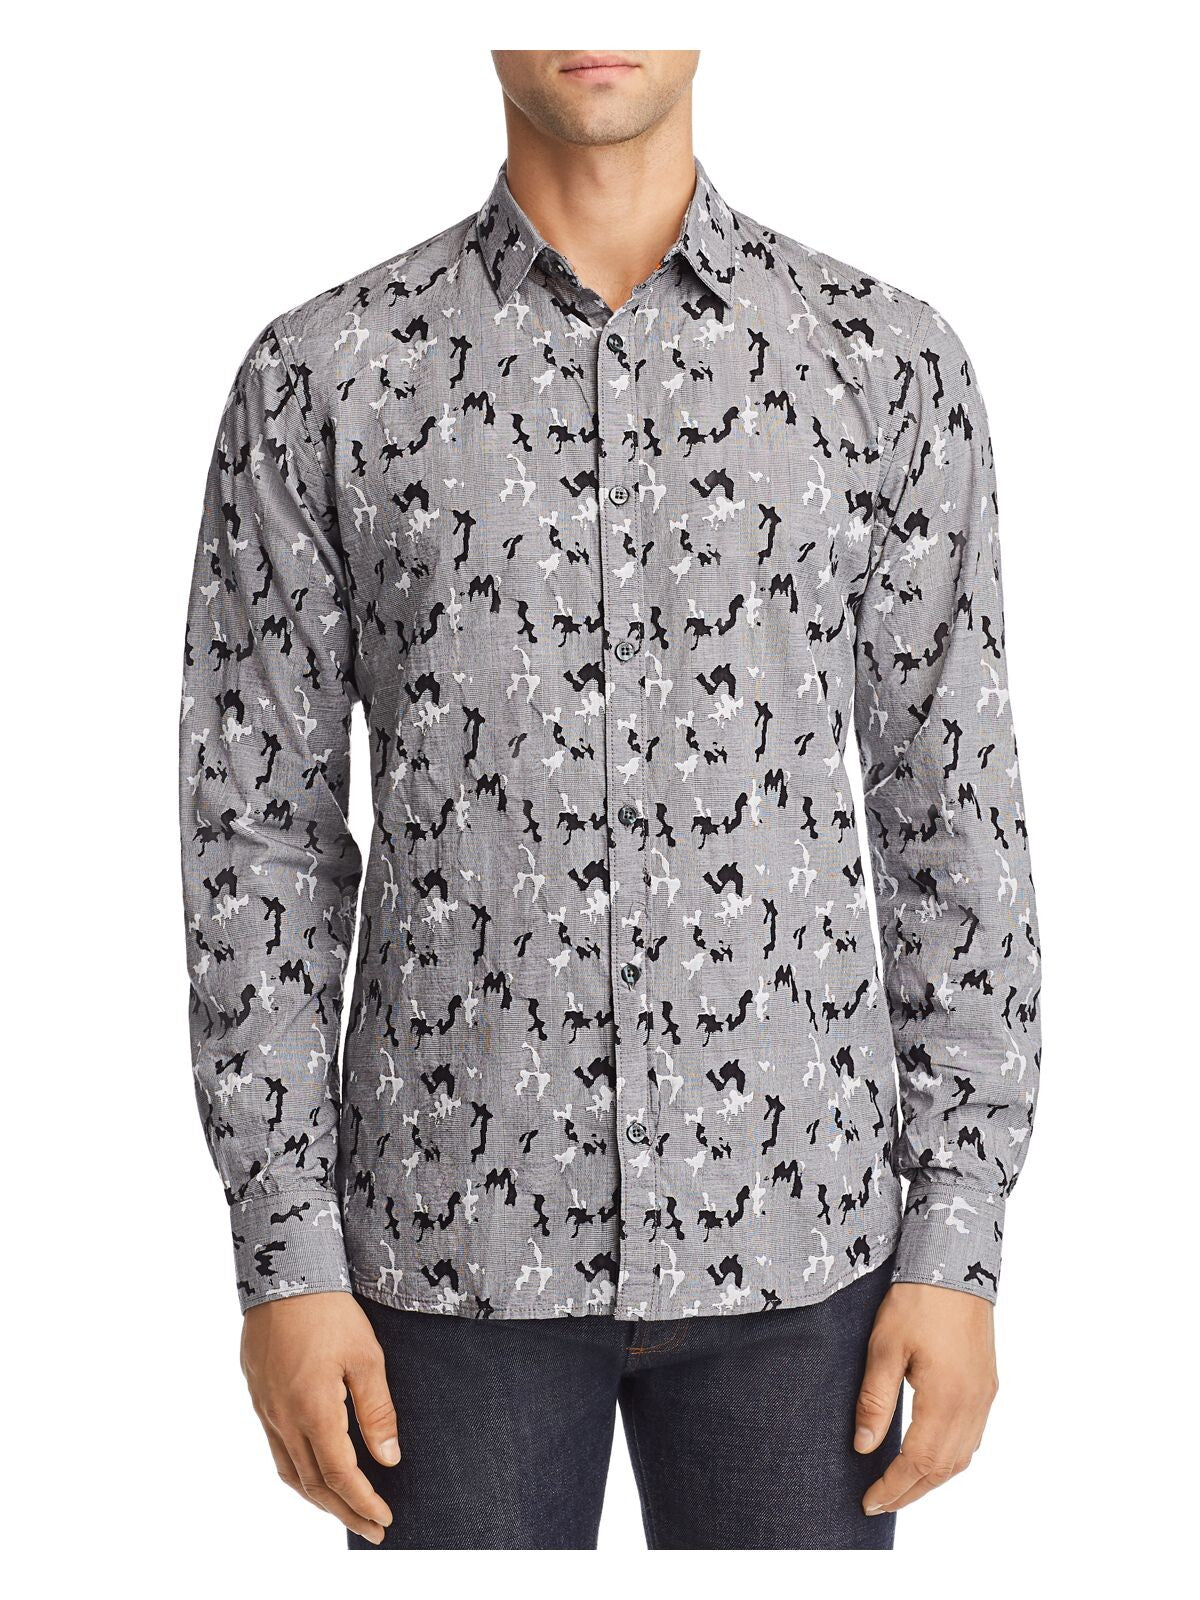 Noize Mens Black Camouflage Collared Button Down Shirt L